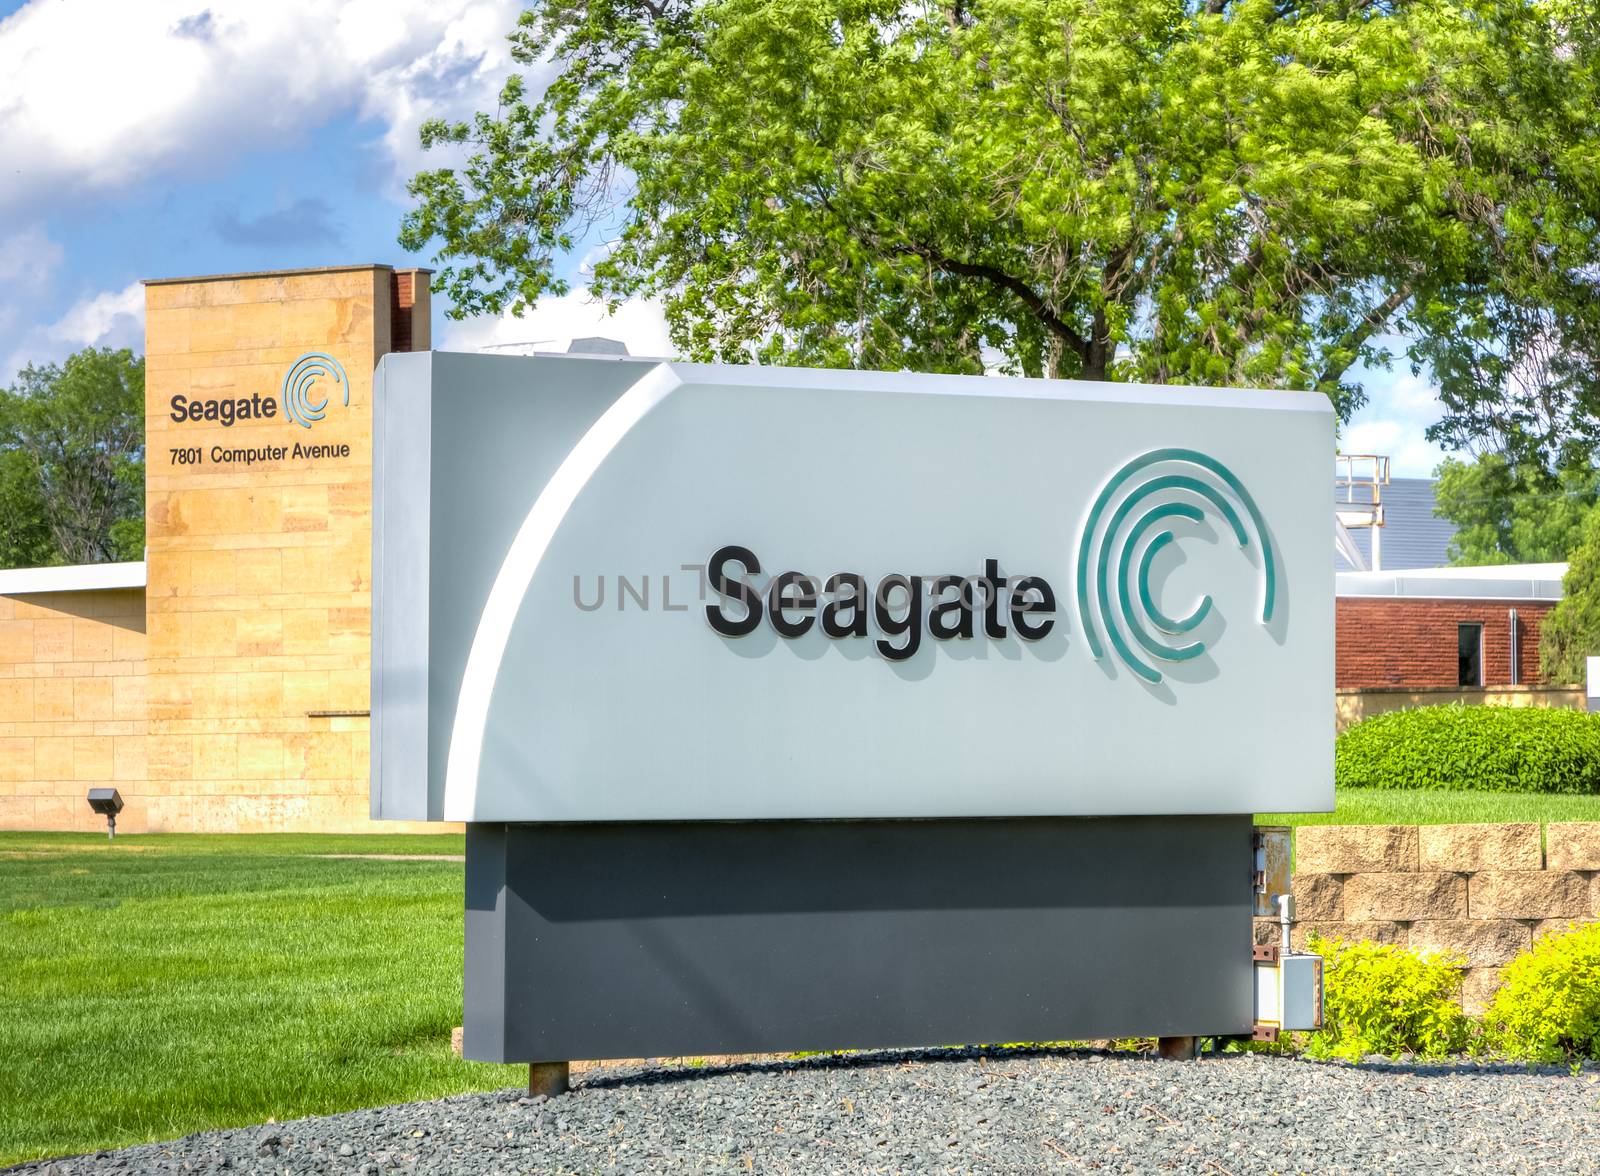 Seagate Technology Sign and Facility by wolterk